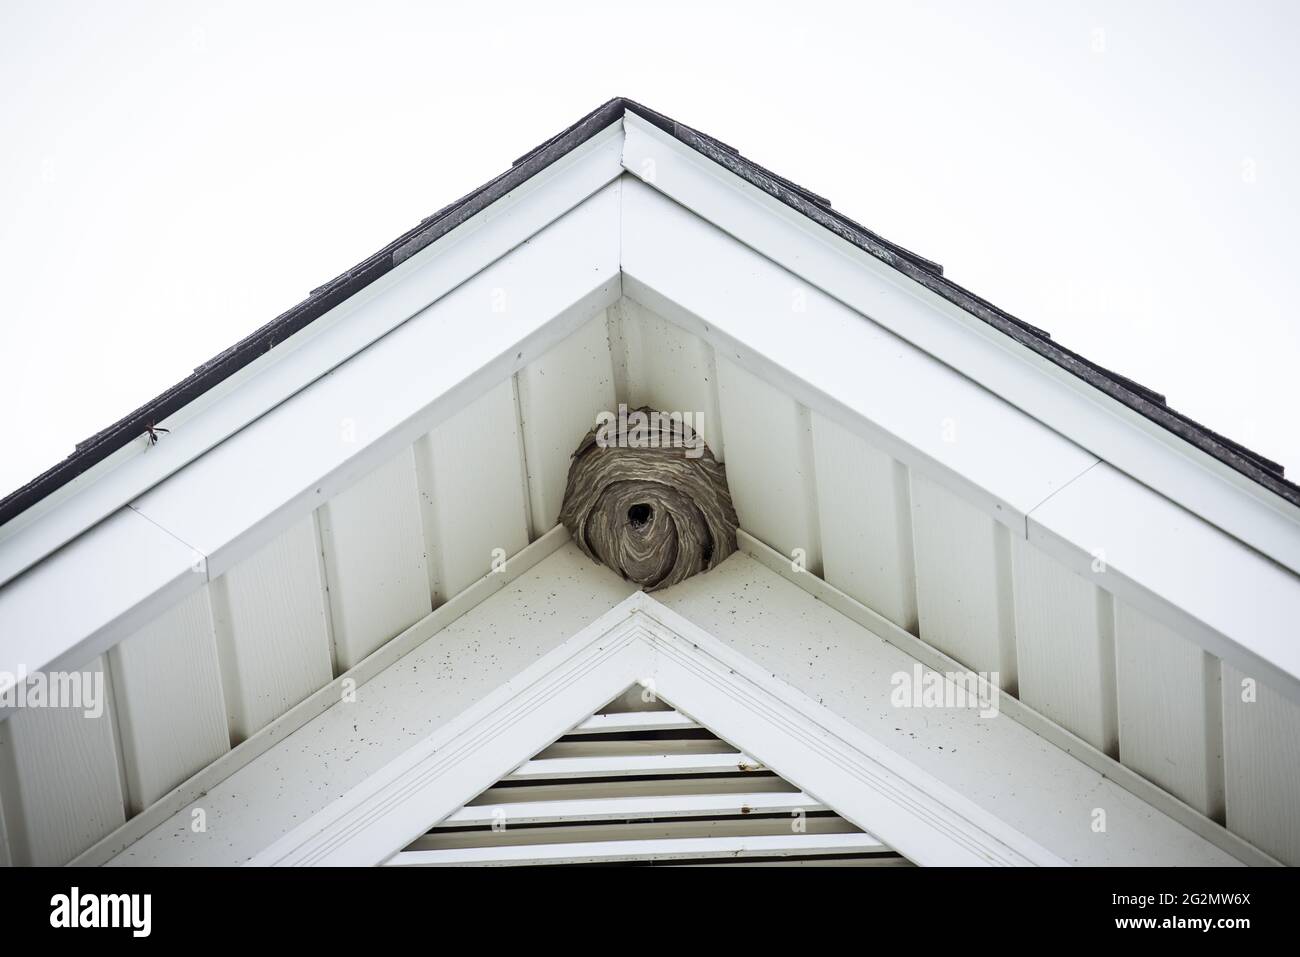 A large hornet's nest in the top of a house Stock Photo